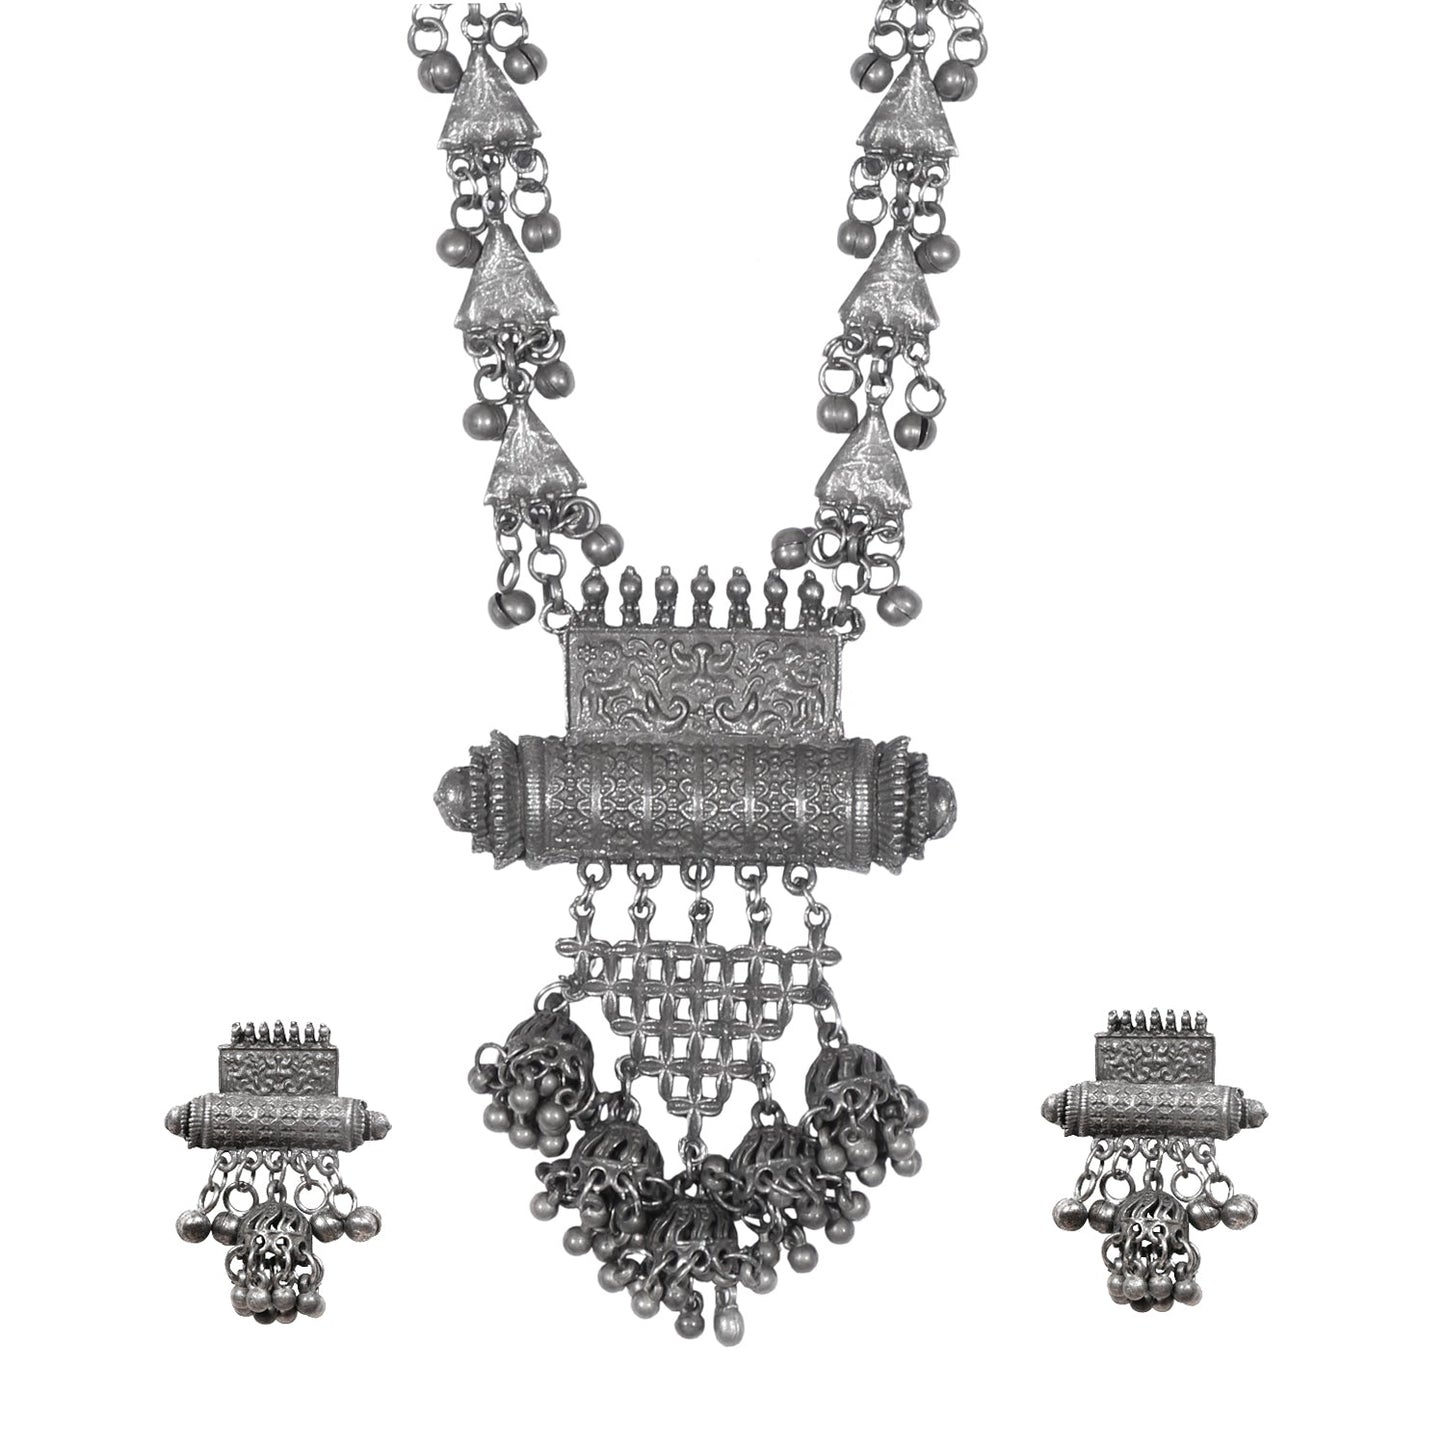 Traditional Indian Handcrafted Real Authentic Silver Look Jewellery Necklace Set With Matching Earrings For Girls & Women (SJ_2915) - Shining Jewel